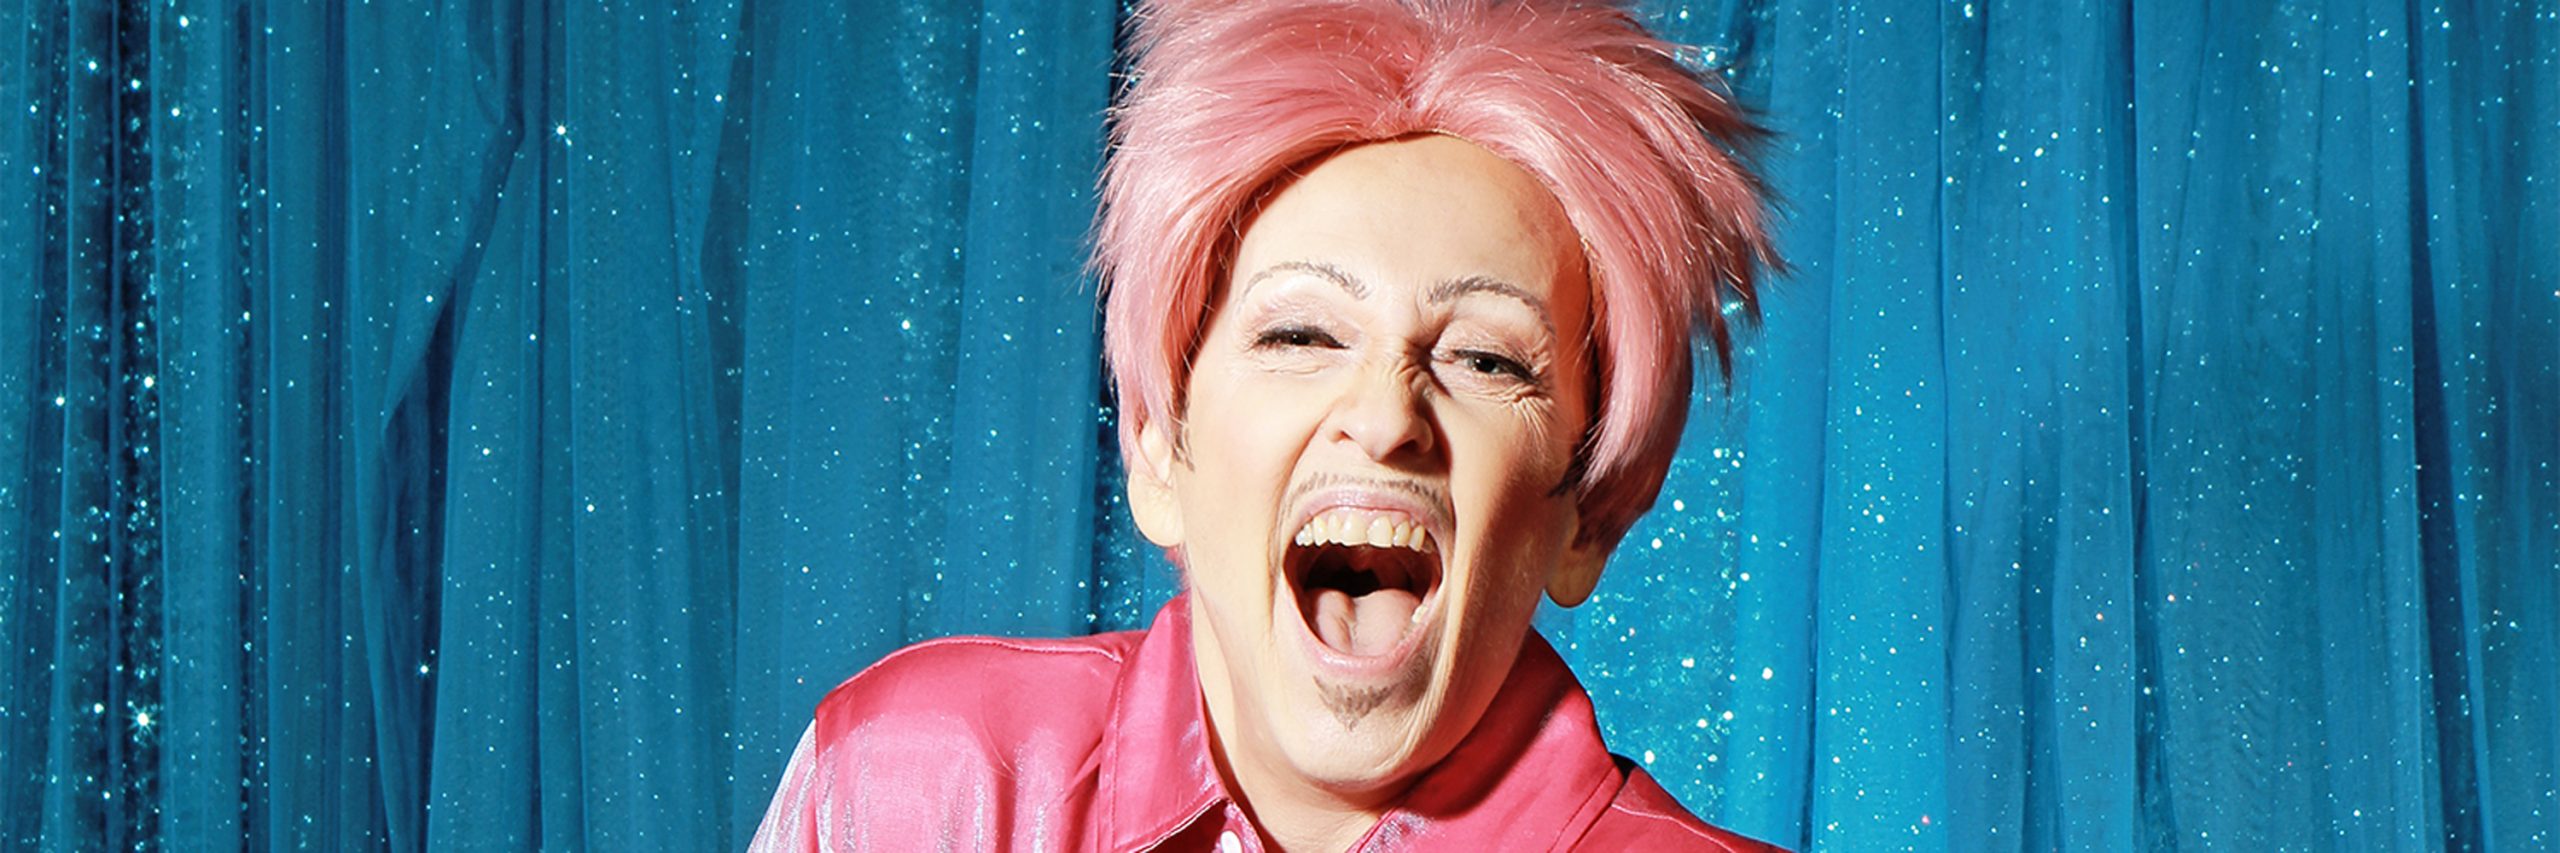 A drag king wearing a hot pink satin shirt and a pastel pink wig is laughing mouth open at the camera. With a sparkly blue curtain background.